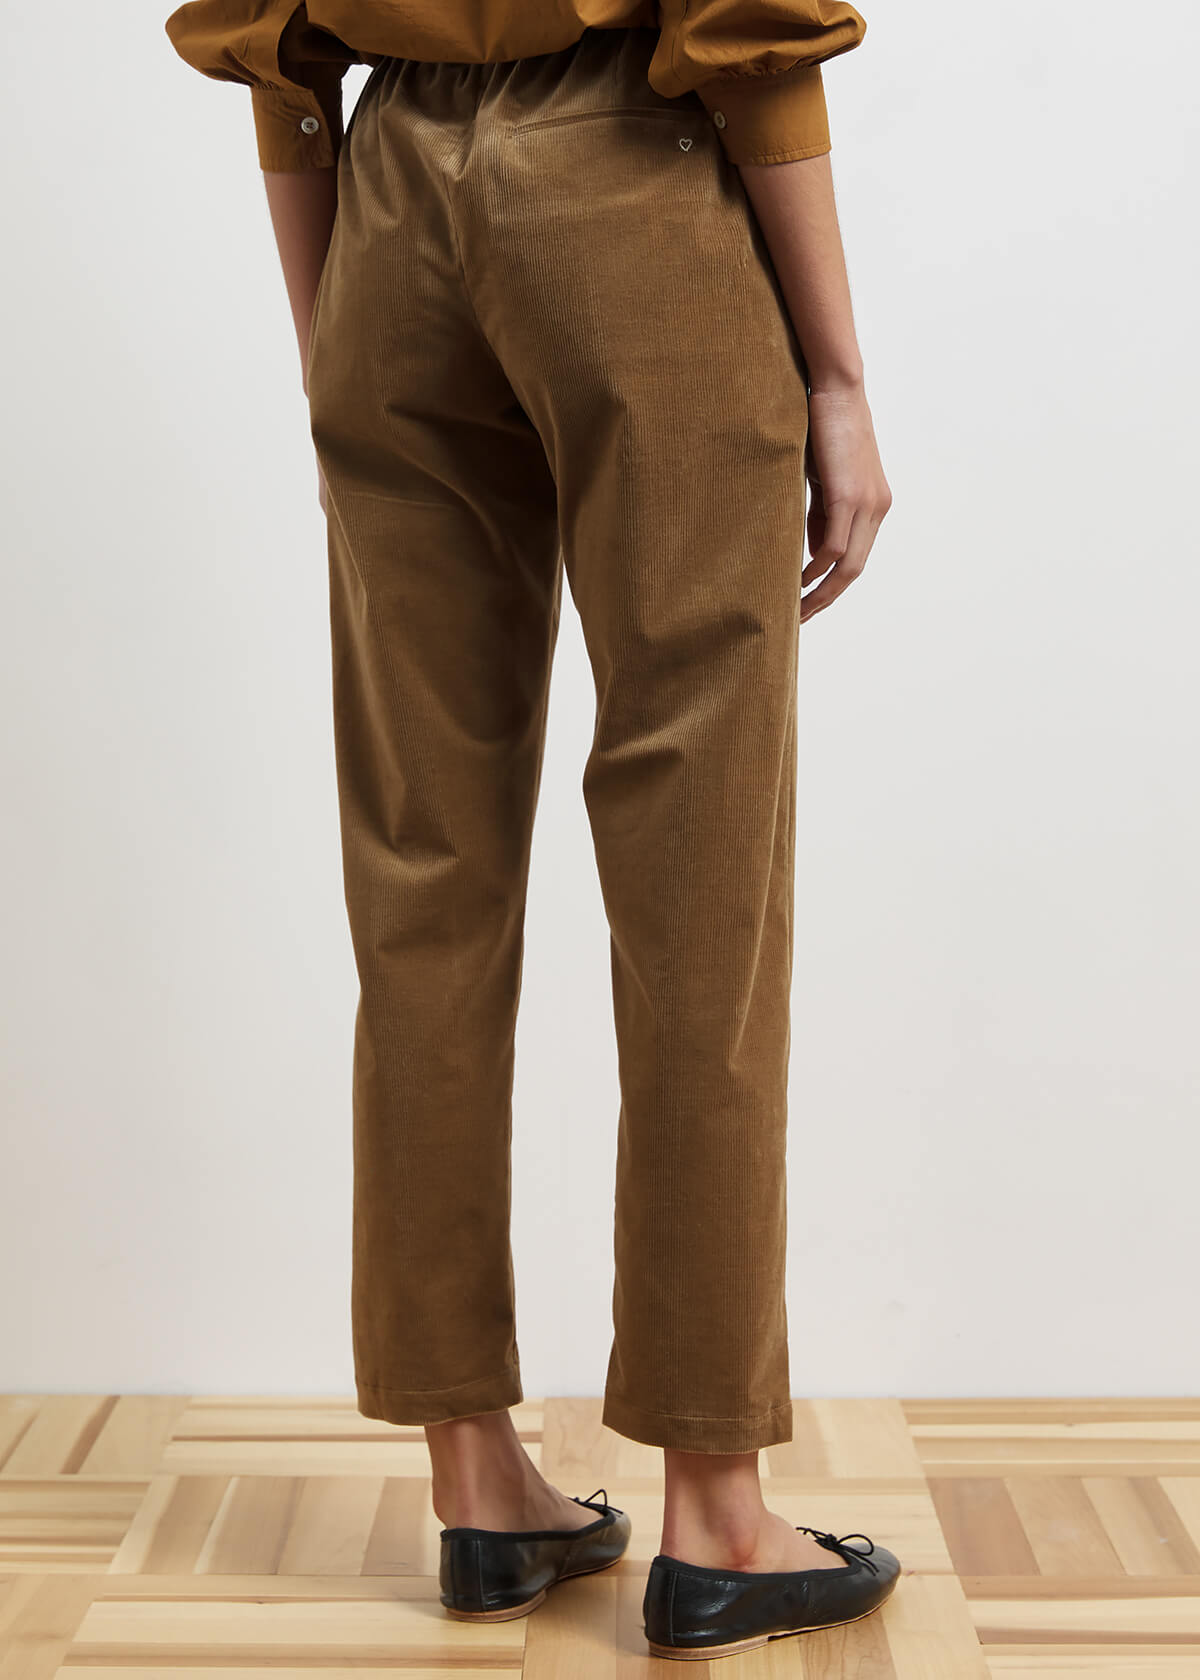 Corduroy straight maternity trousers length 30 camel La Redoute  Collections  La Redoute